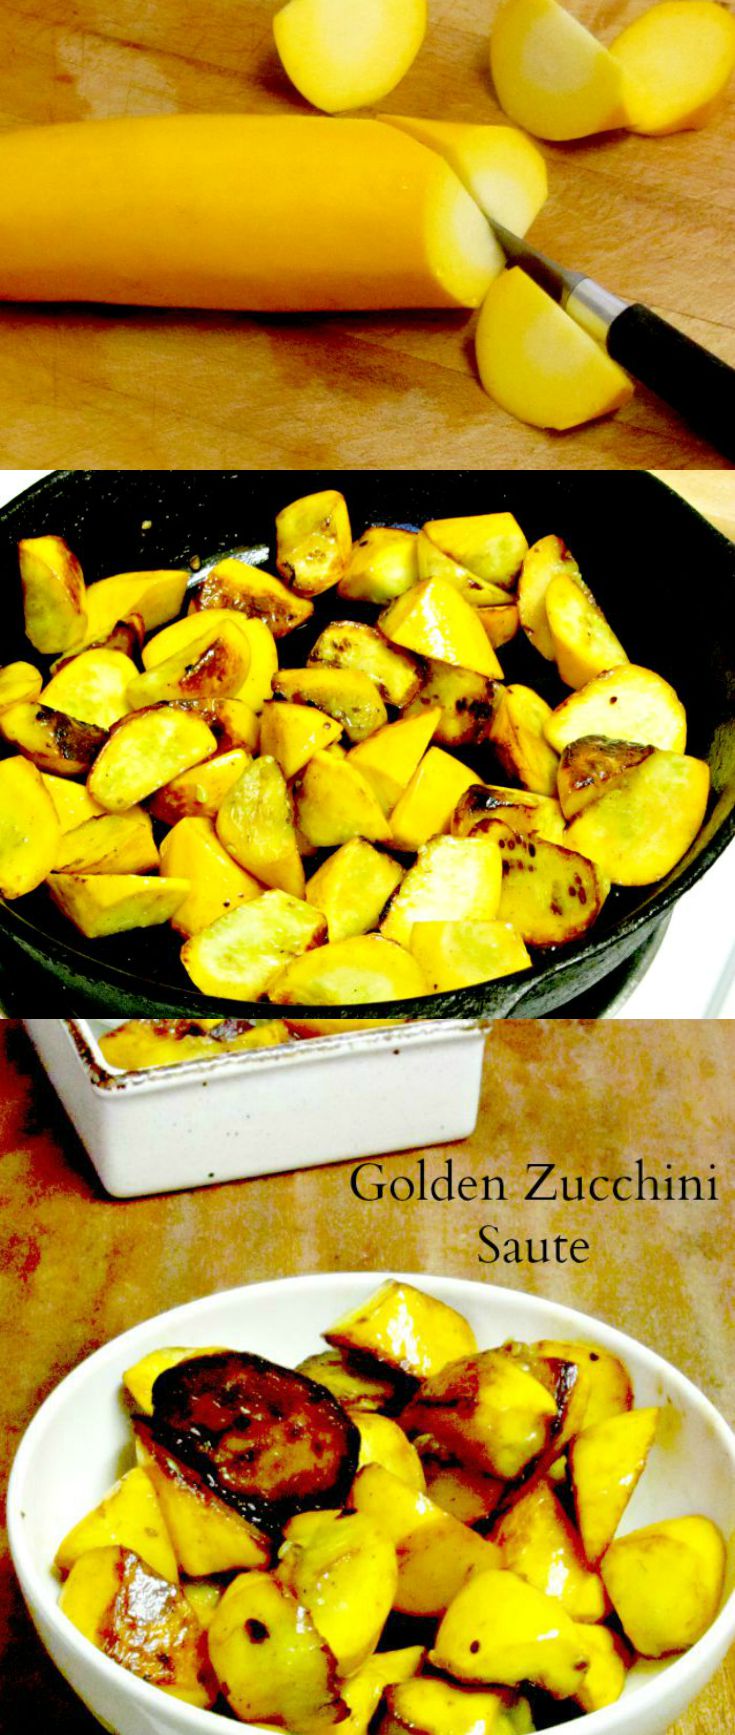 Summer squash saute, cooked in five minutes, with a touch of butter for a delicate golden brown. www.inhabitedkitchen.com